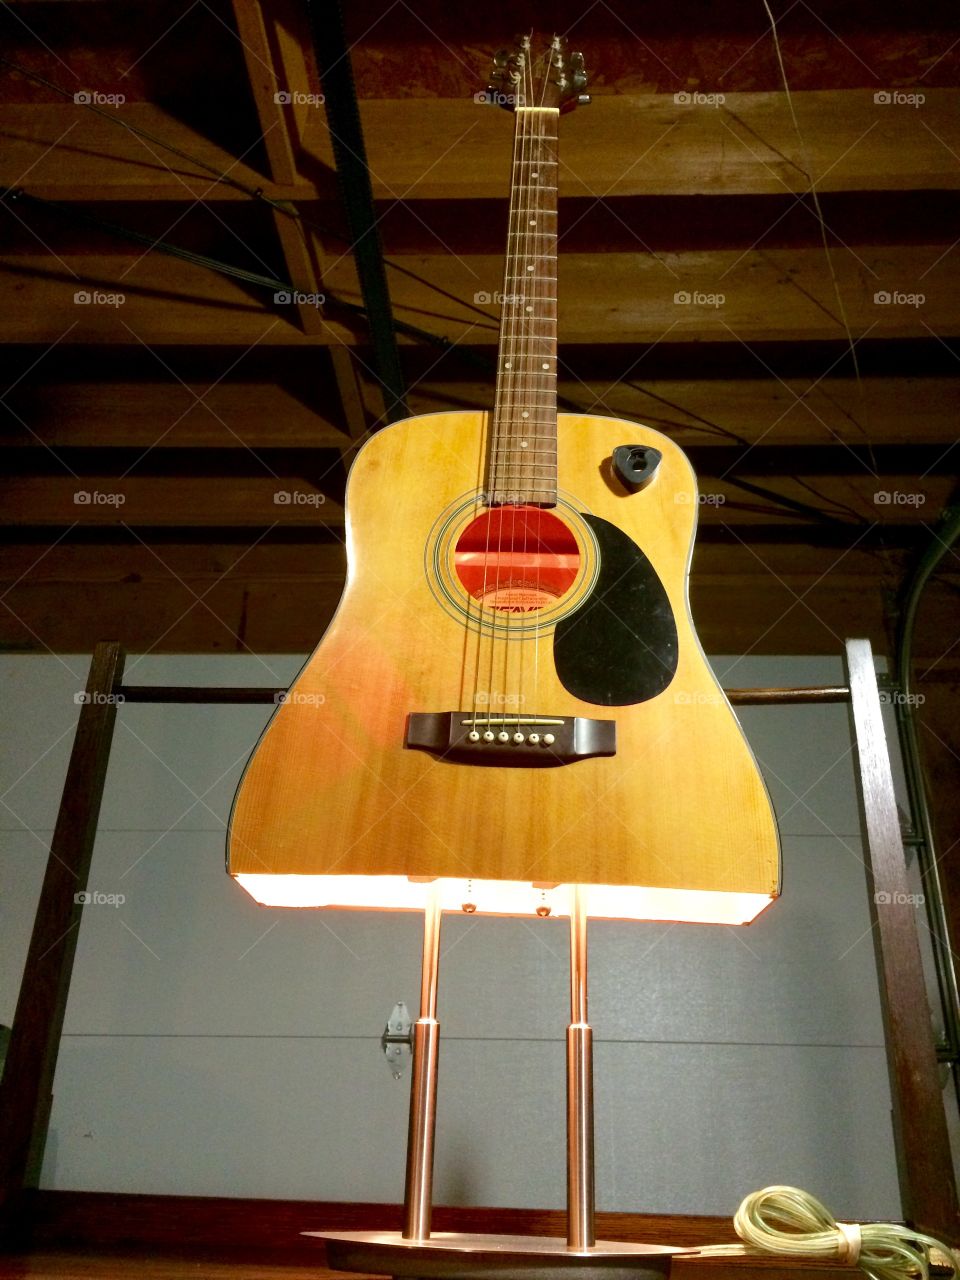 Guitar Lamp. One of a kind lamps